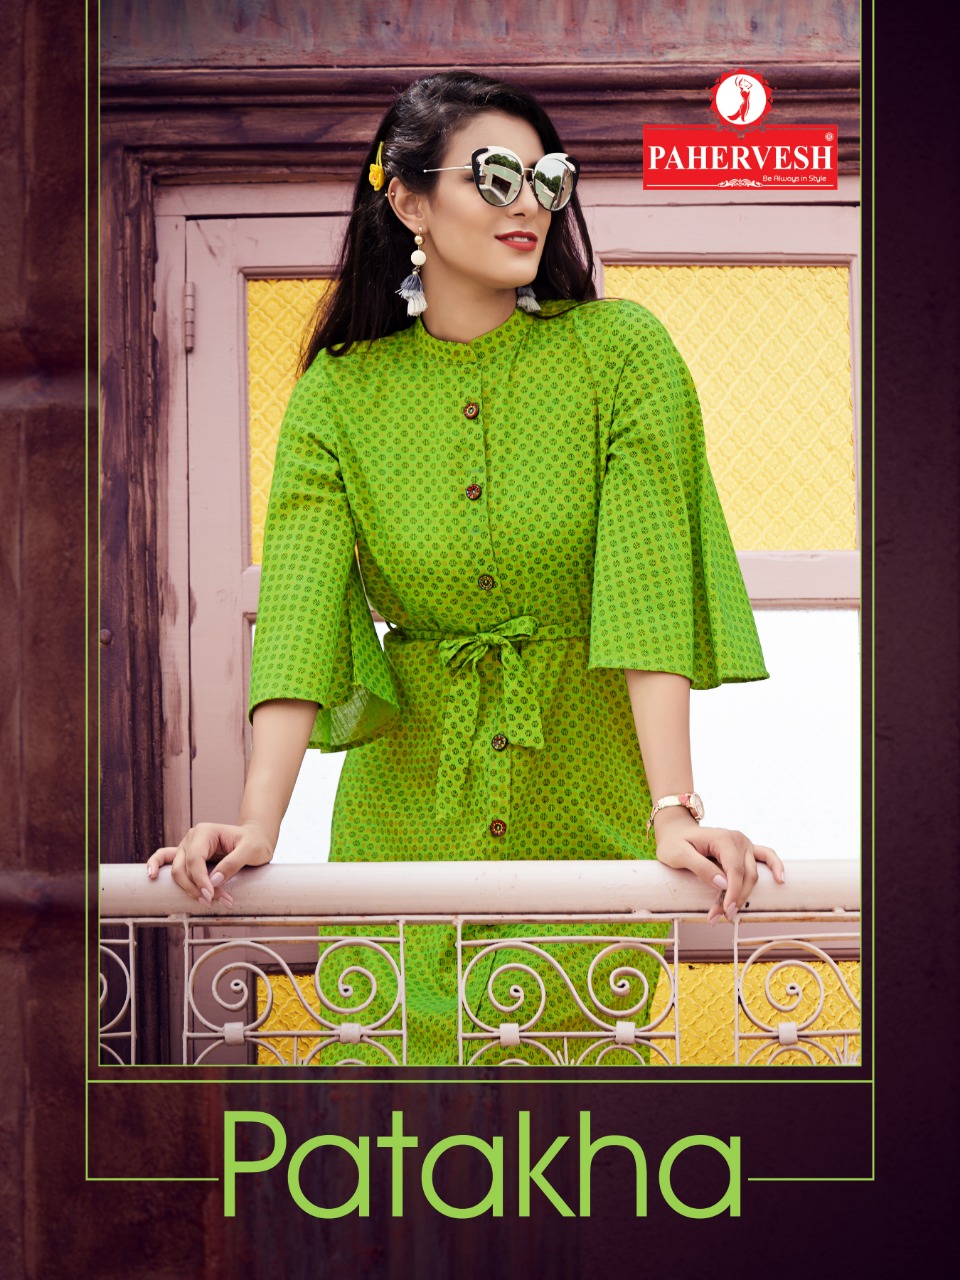 Pahervesh Patakha Catalogue Fancy Rayon Two Tone With Foil Print Kurtis Collection Wholesale Rates At Surat